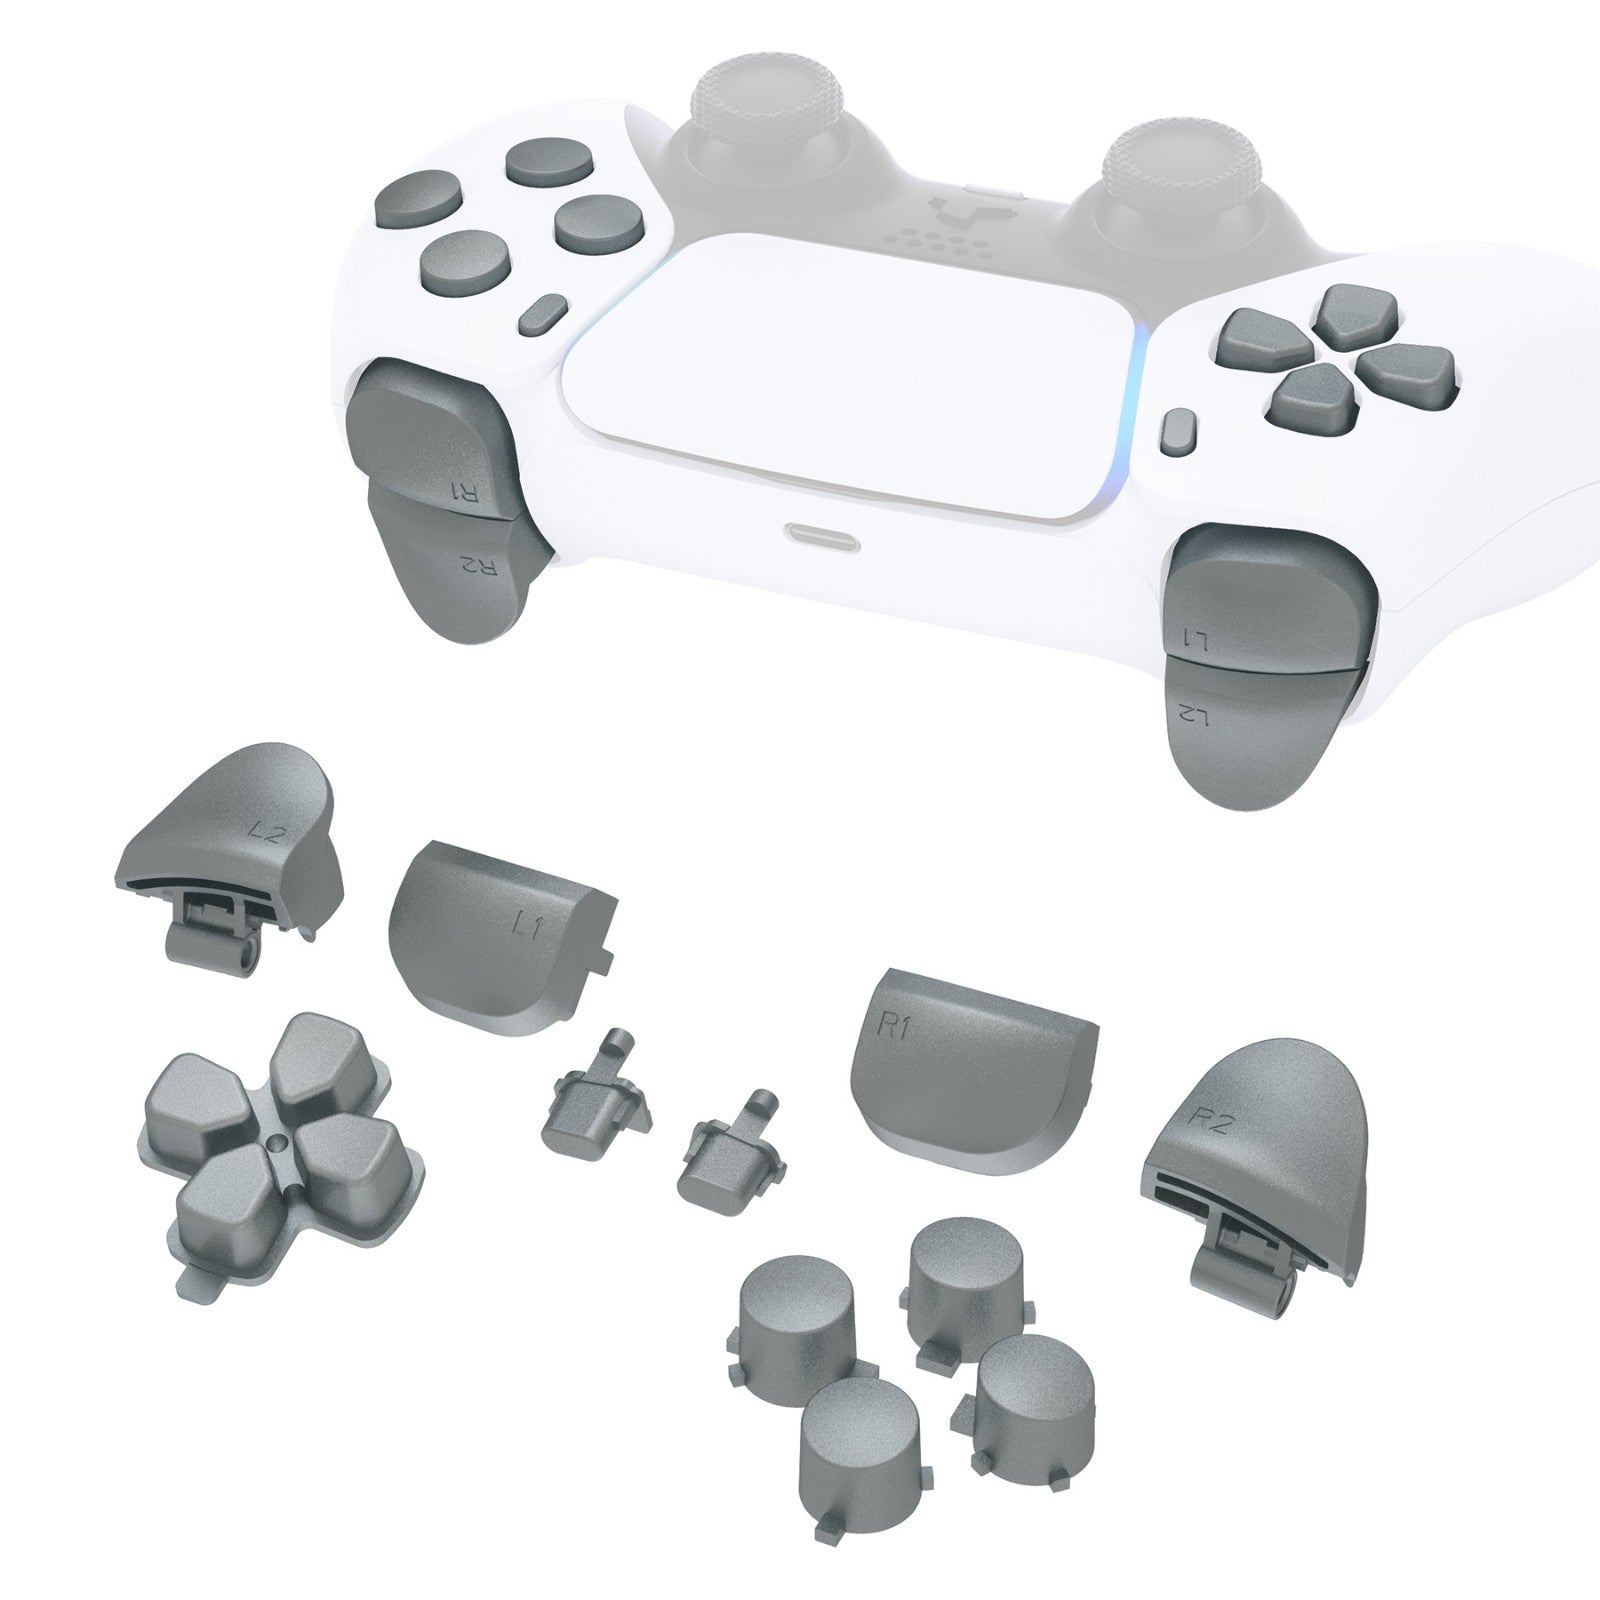 eXtremeRate Retail Replacement D-pad R1 L1 R2 L2 Triggers Share Options Face Buttons, Metallic Steel Gray Full Set Buttons Compatible with ps5 Controller BDM-010 & BDM-020 - JPF1039G2